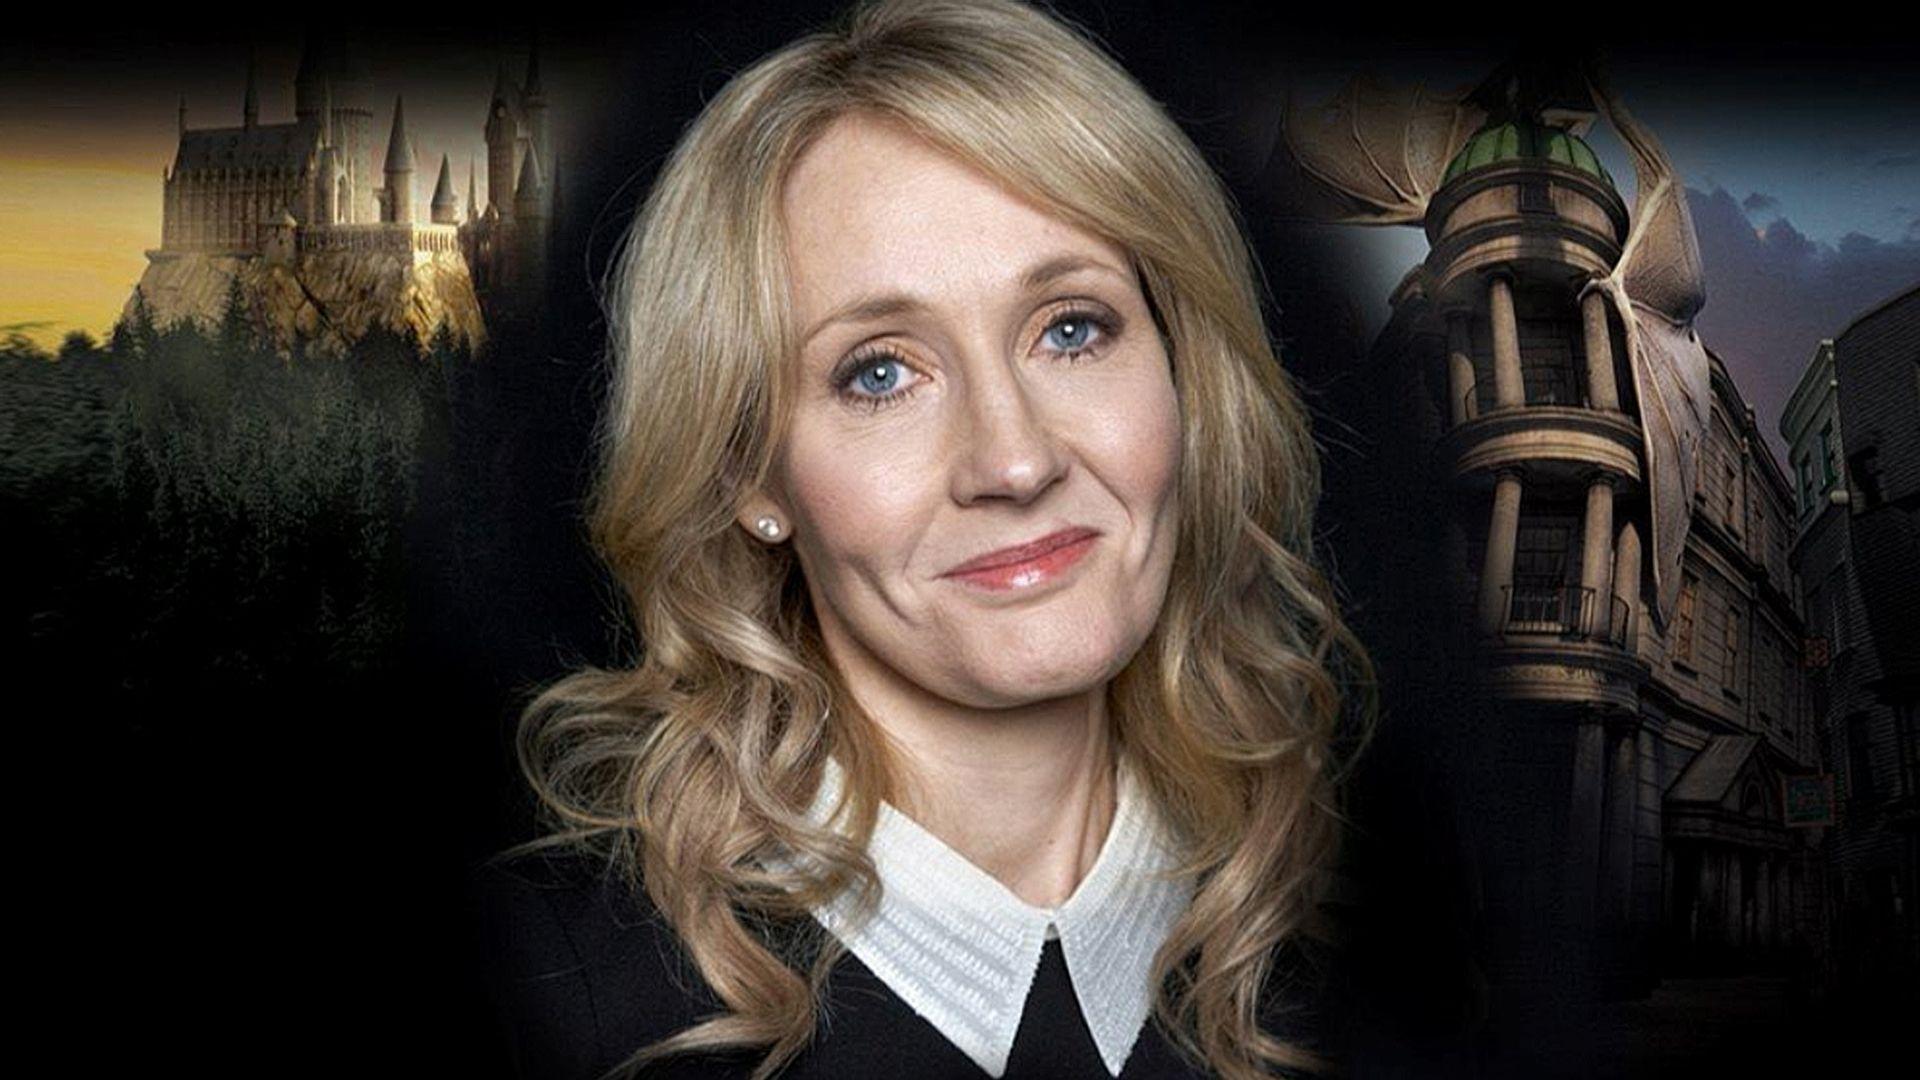 J.K. Rowling to release new Harry Potter story on Halloween